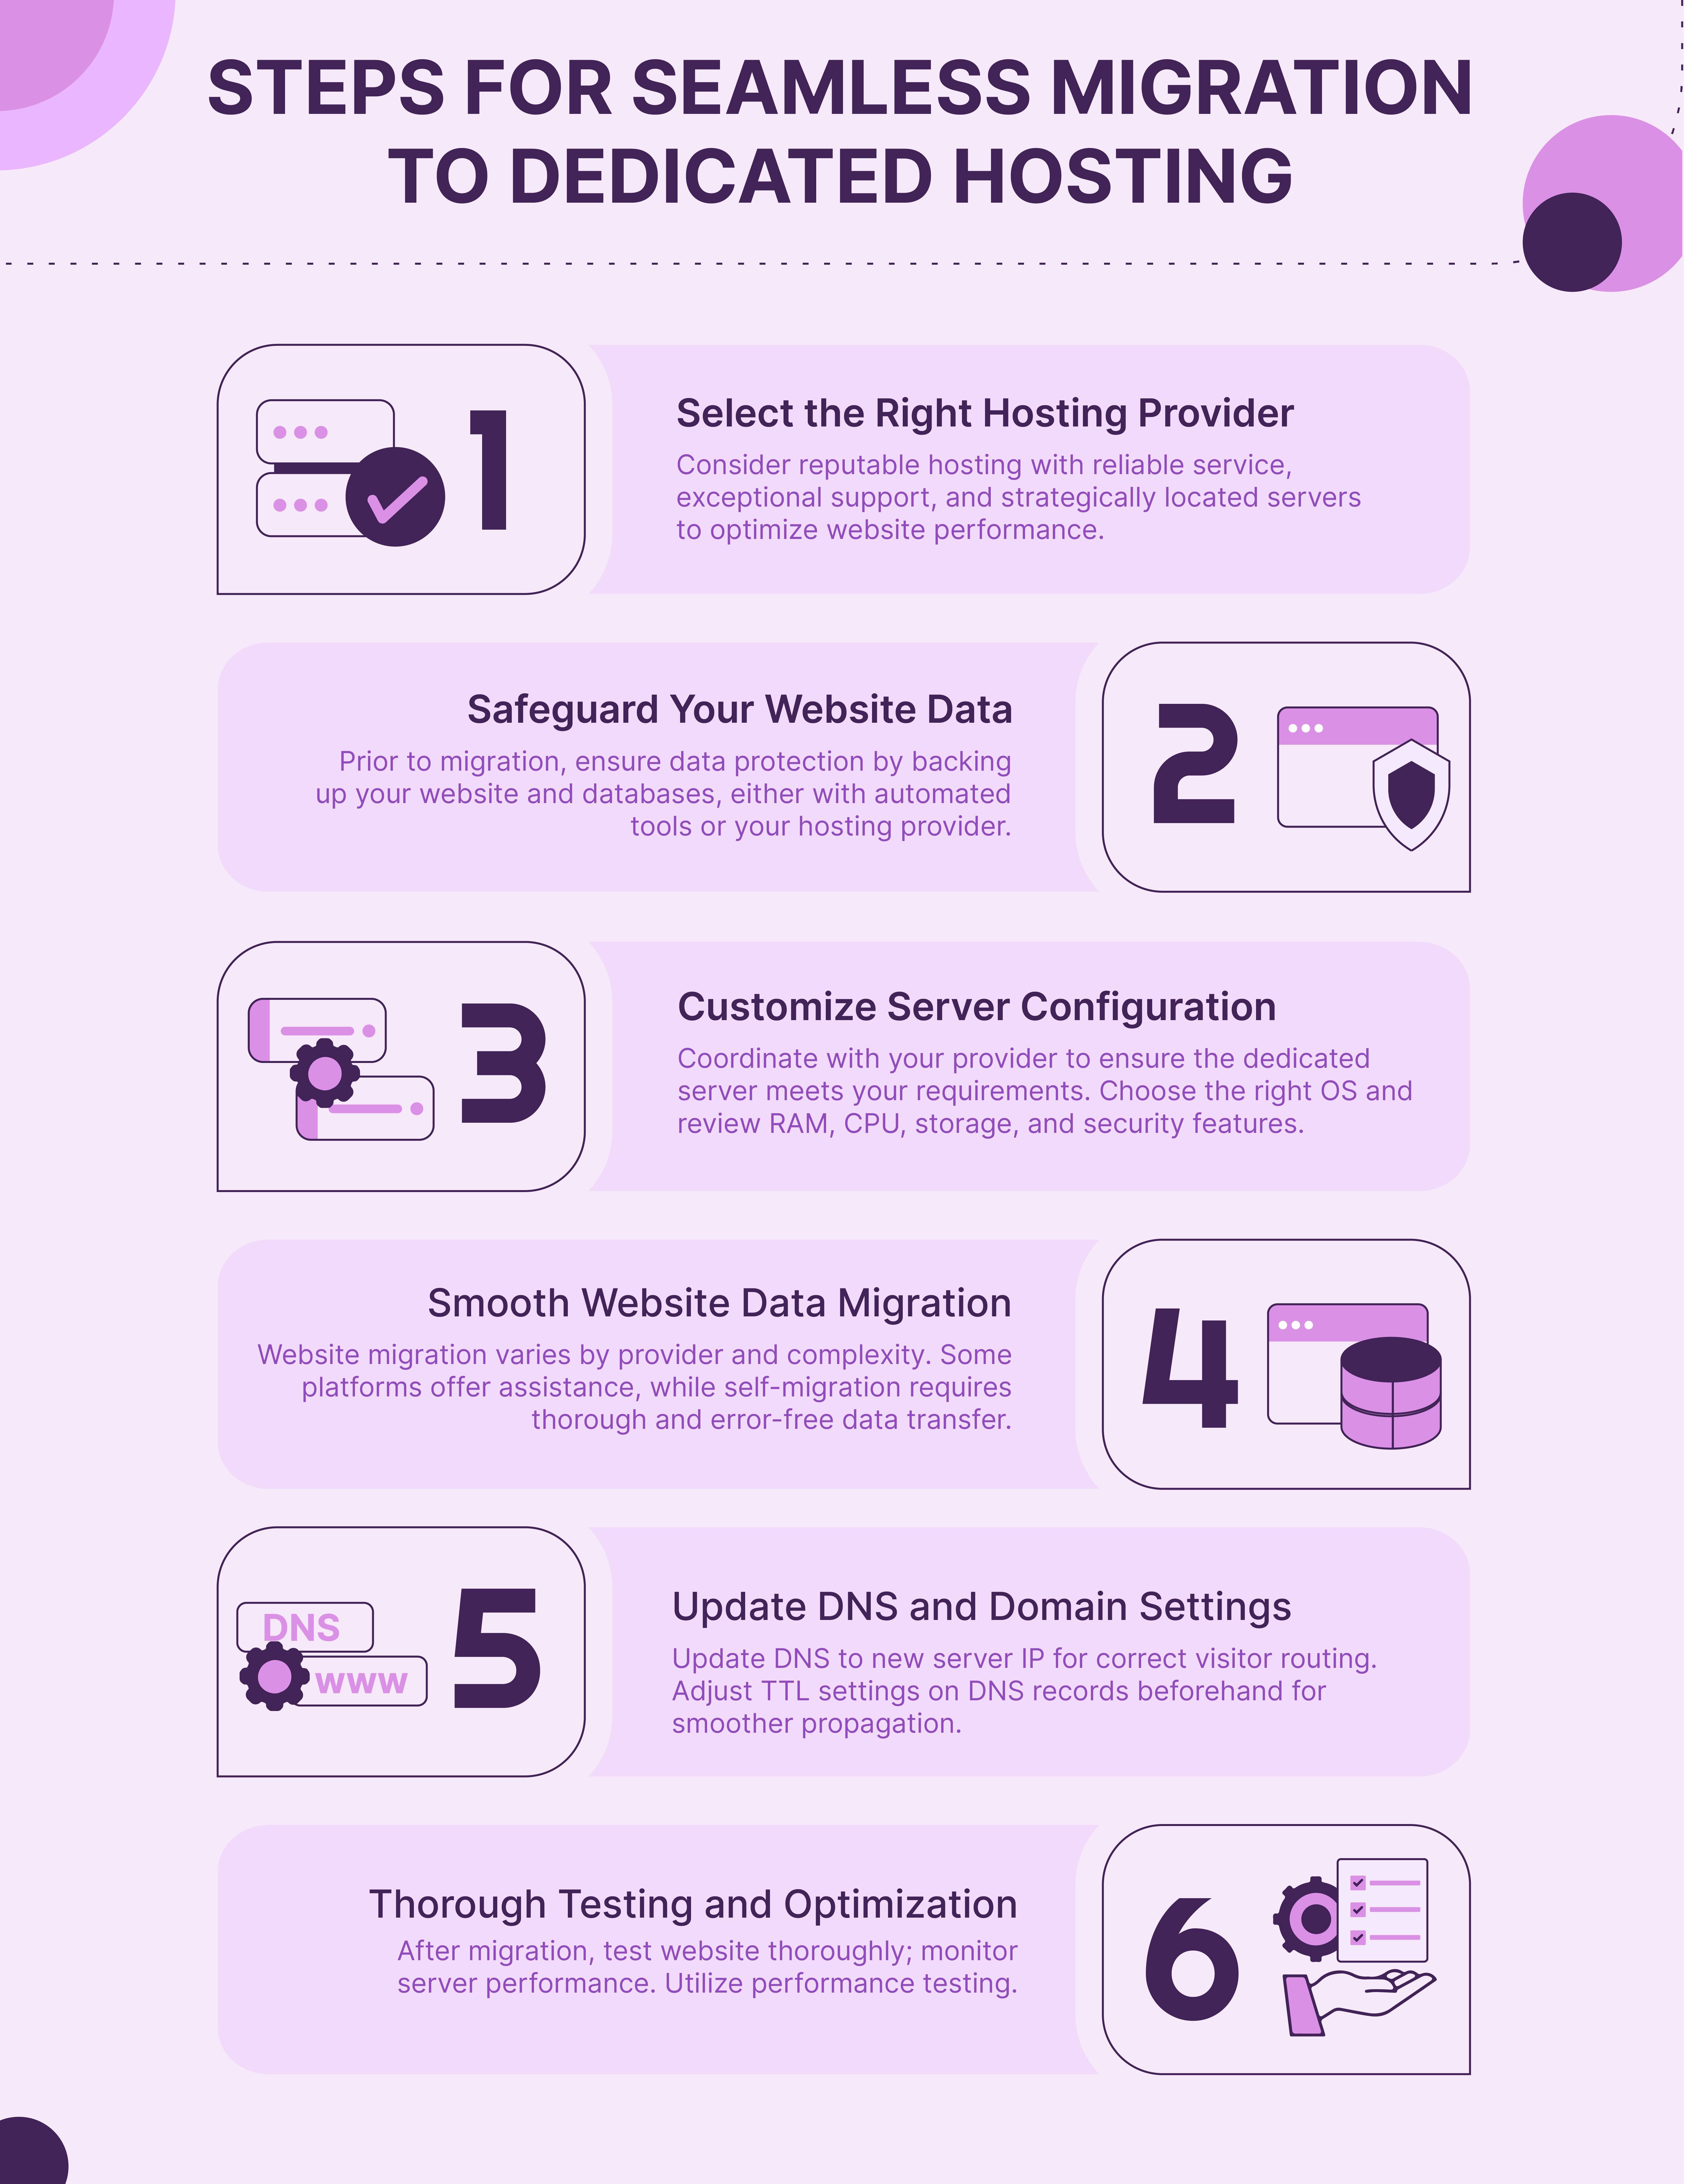 Steps for Seamless Migration to Dedicated Hosting